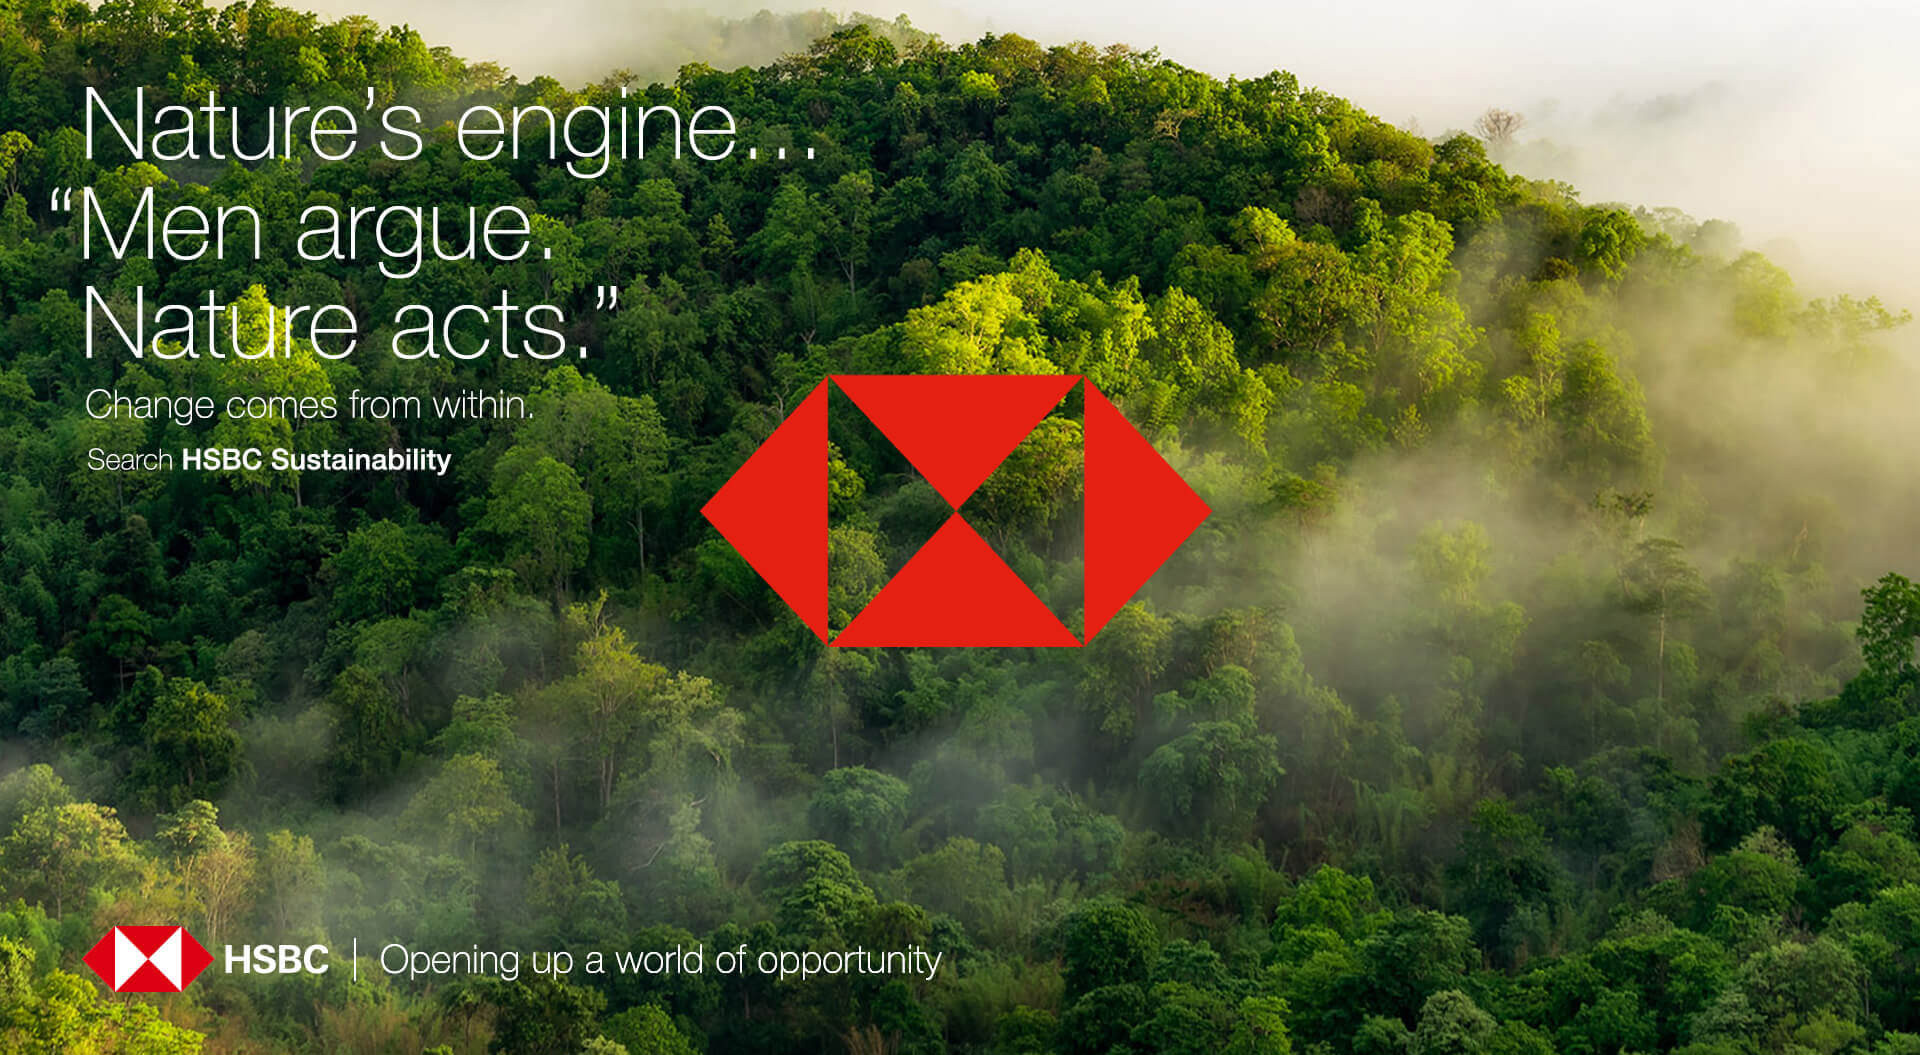 HSBC Bank Advertising design sustainability. Message, “Nature’s engine… Men argue nature acts” - logo design - strap line “Opening up a world of opportunity”